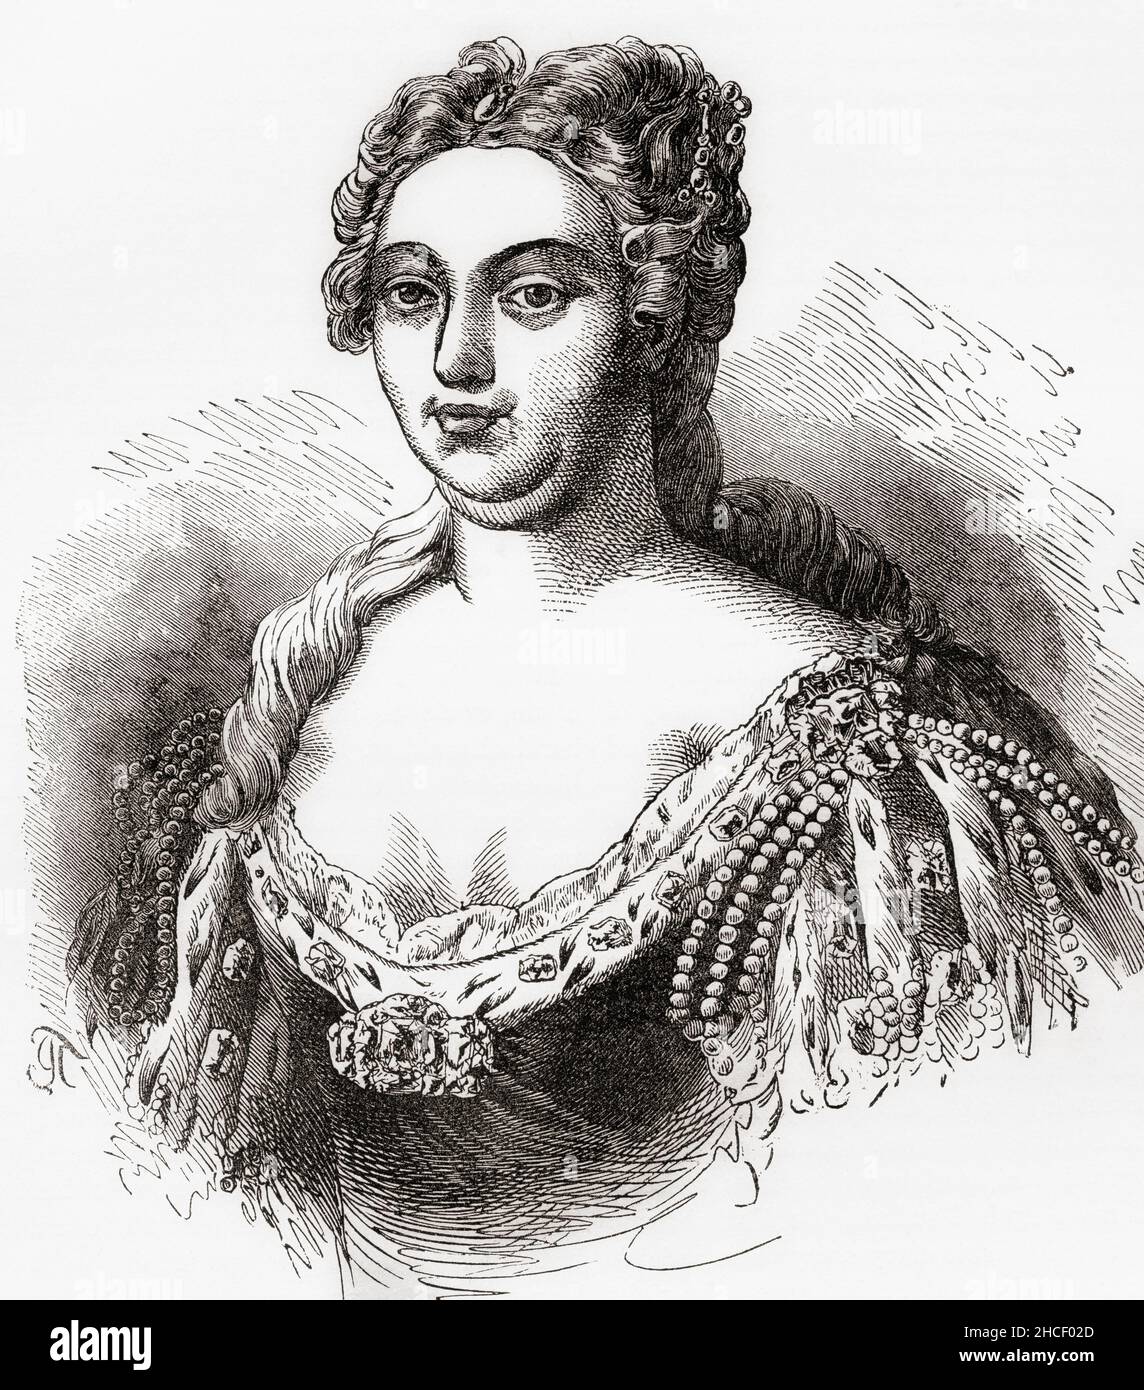 Caroline of Brandenburg-Ansbach, 1683 – 1737.  Queen of Great Britain and Ireland as the wife of King George II.  From Cassell's Illustrated History of England, published c.1890. Stock Photo